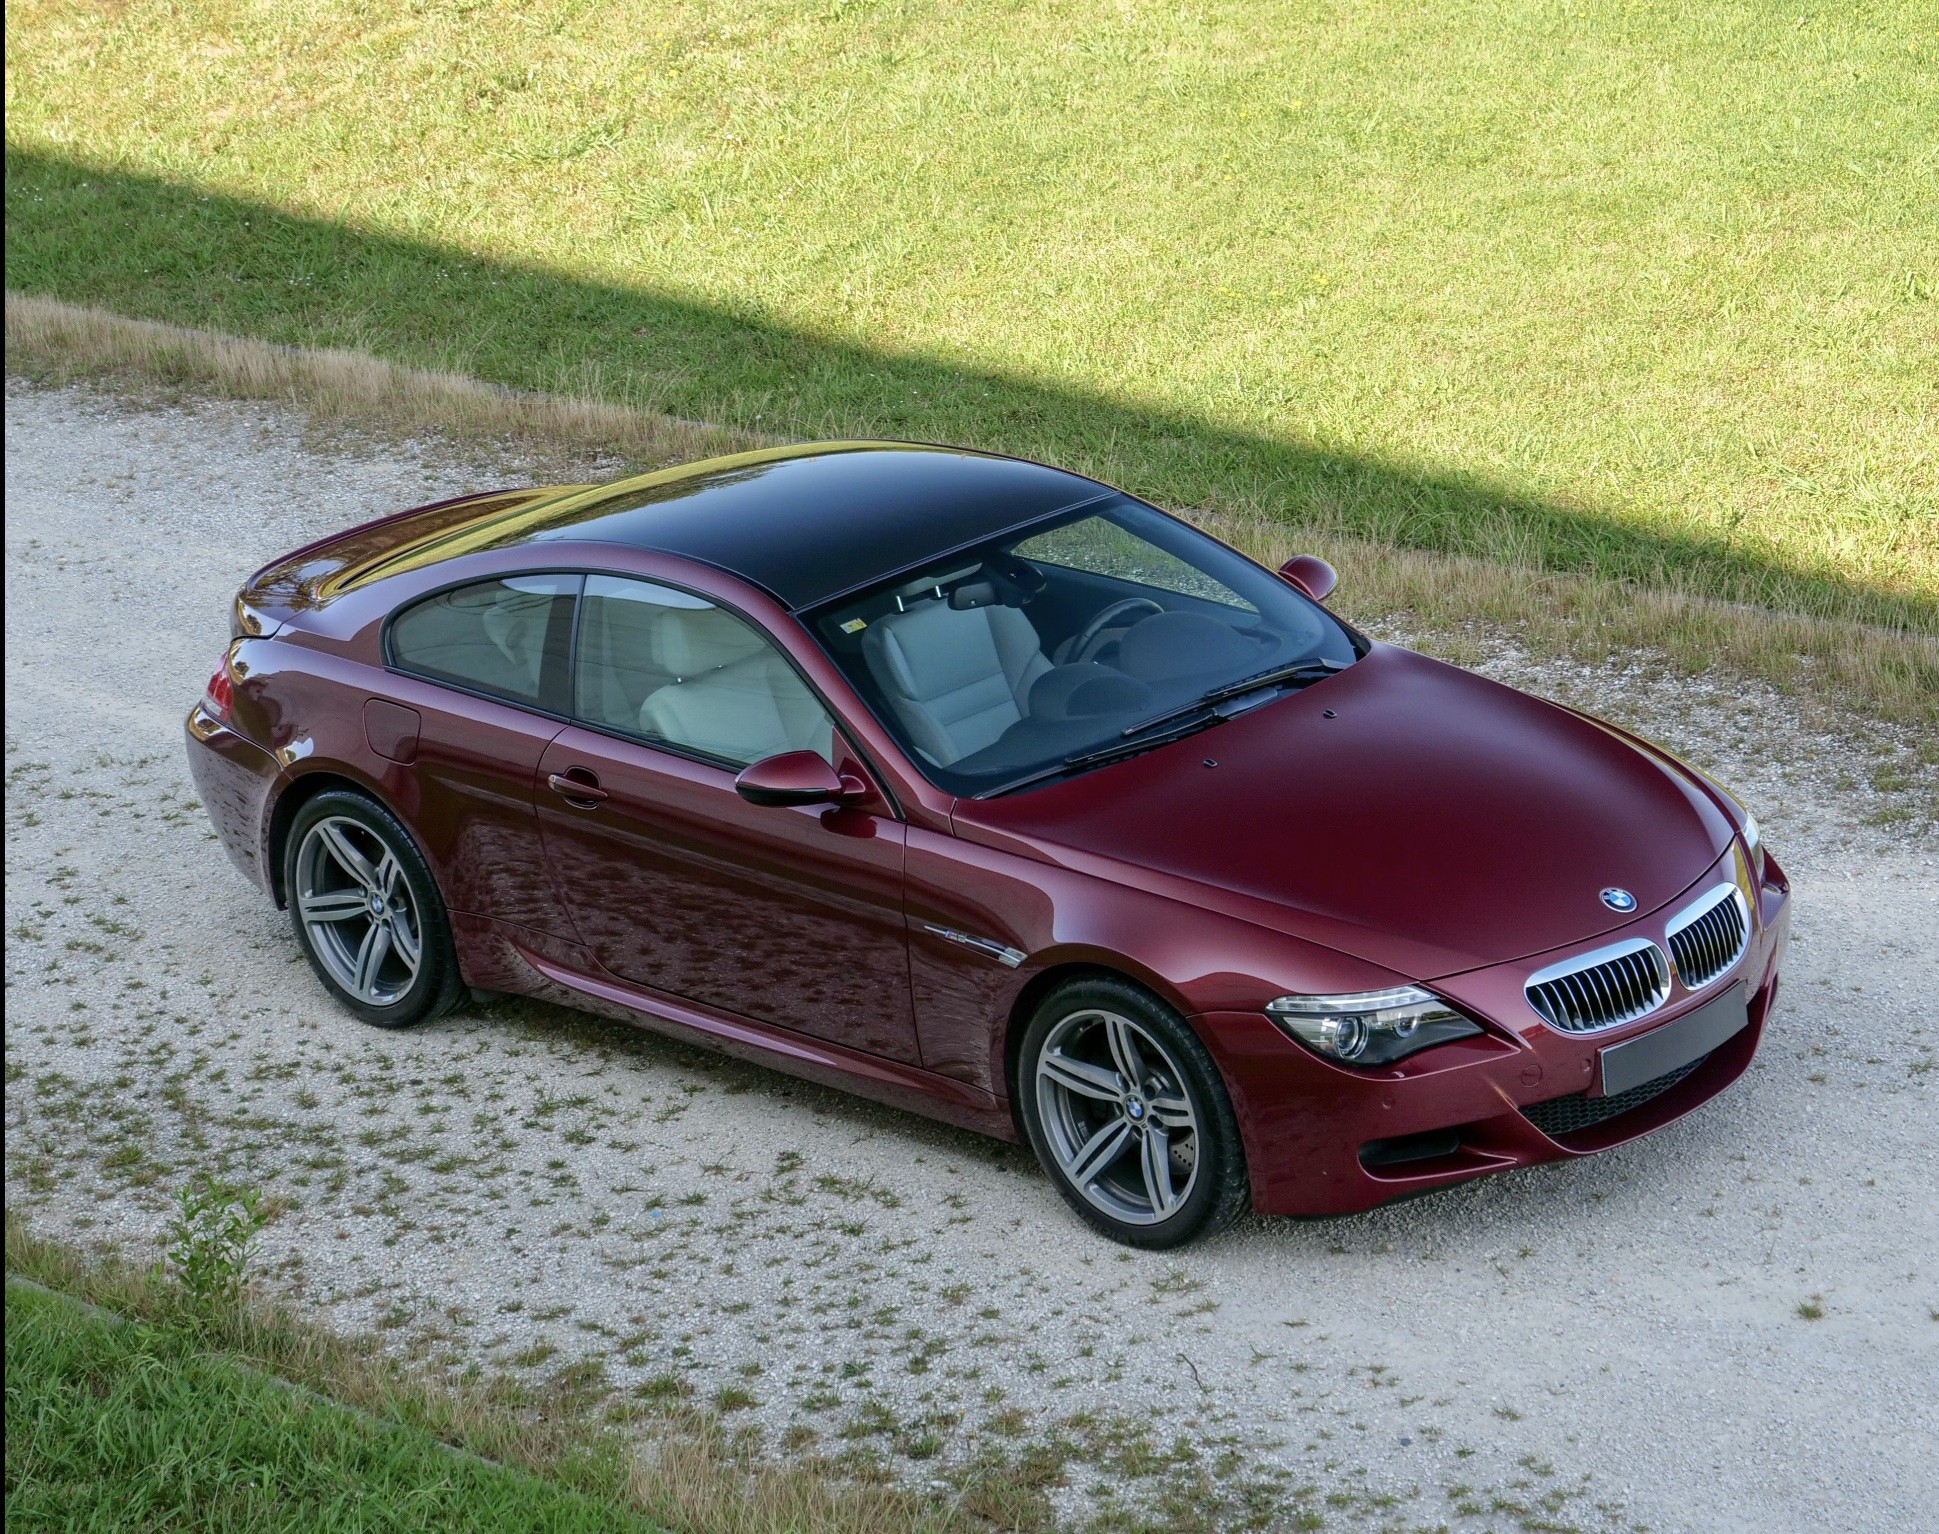 https://s1.cdn.autoevolution.com/images/news/gallery/someone-paid-40000-for-a-2007-bmw-m6-on-the-used-car-market_1.jpg